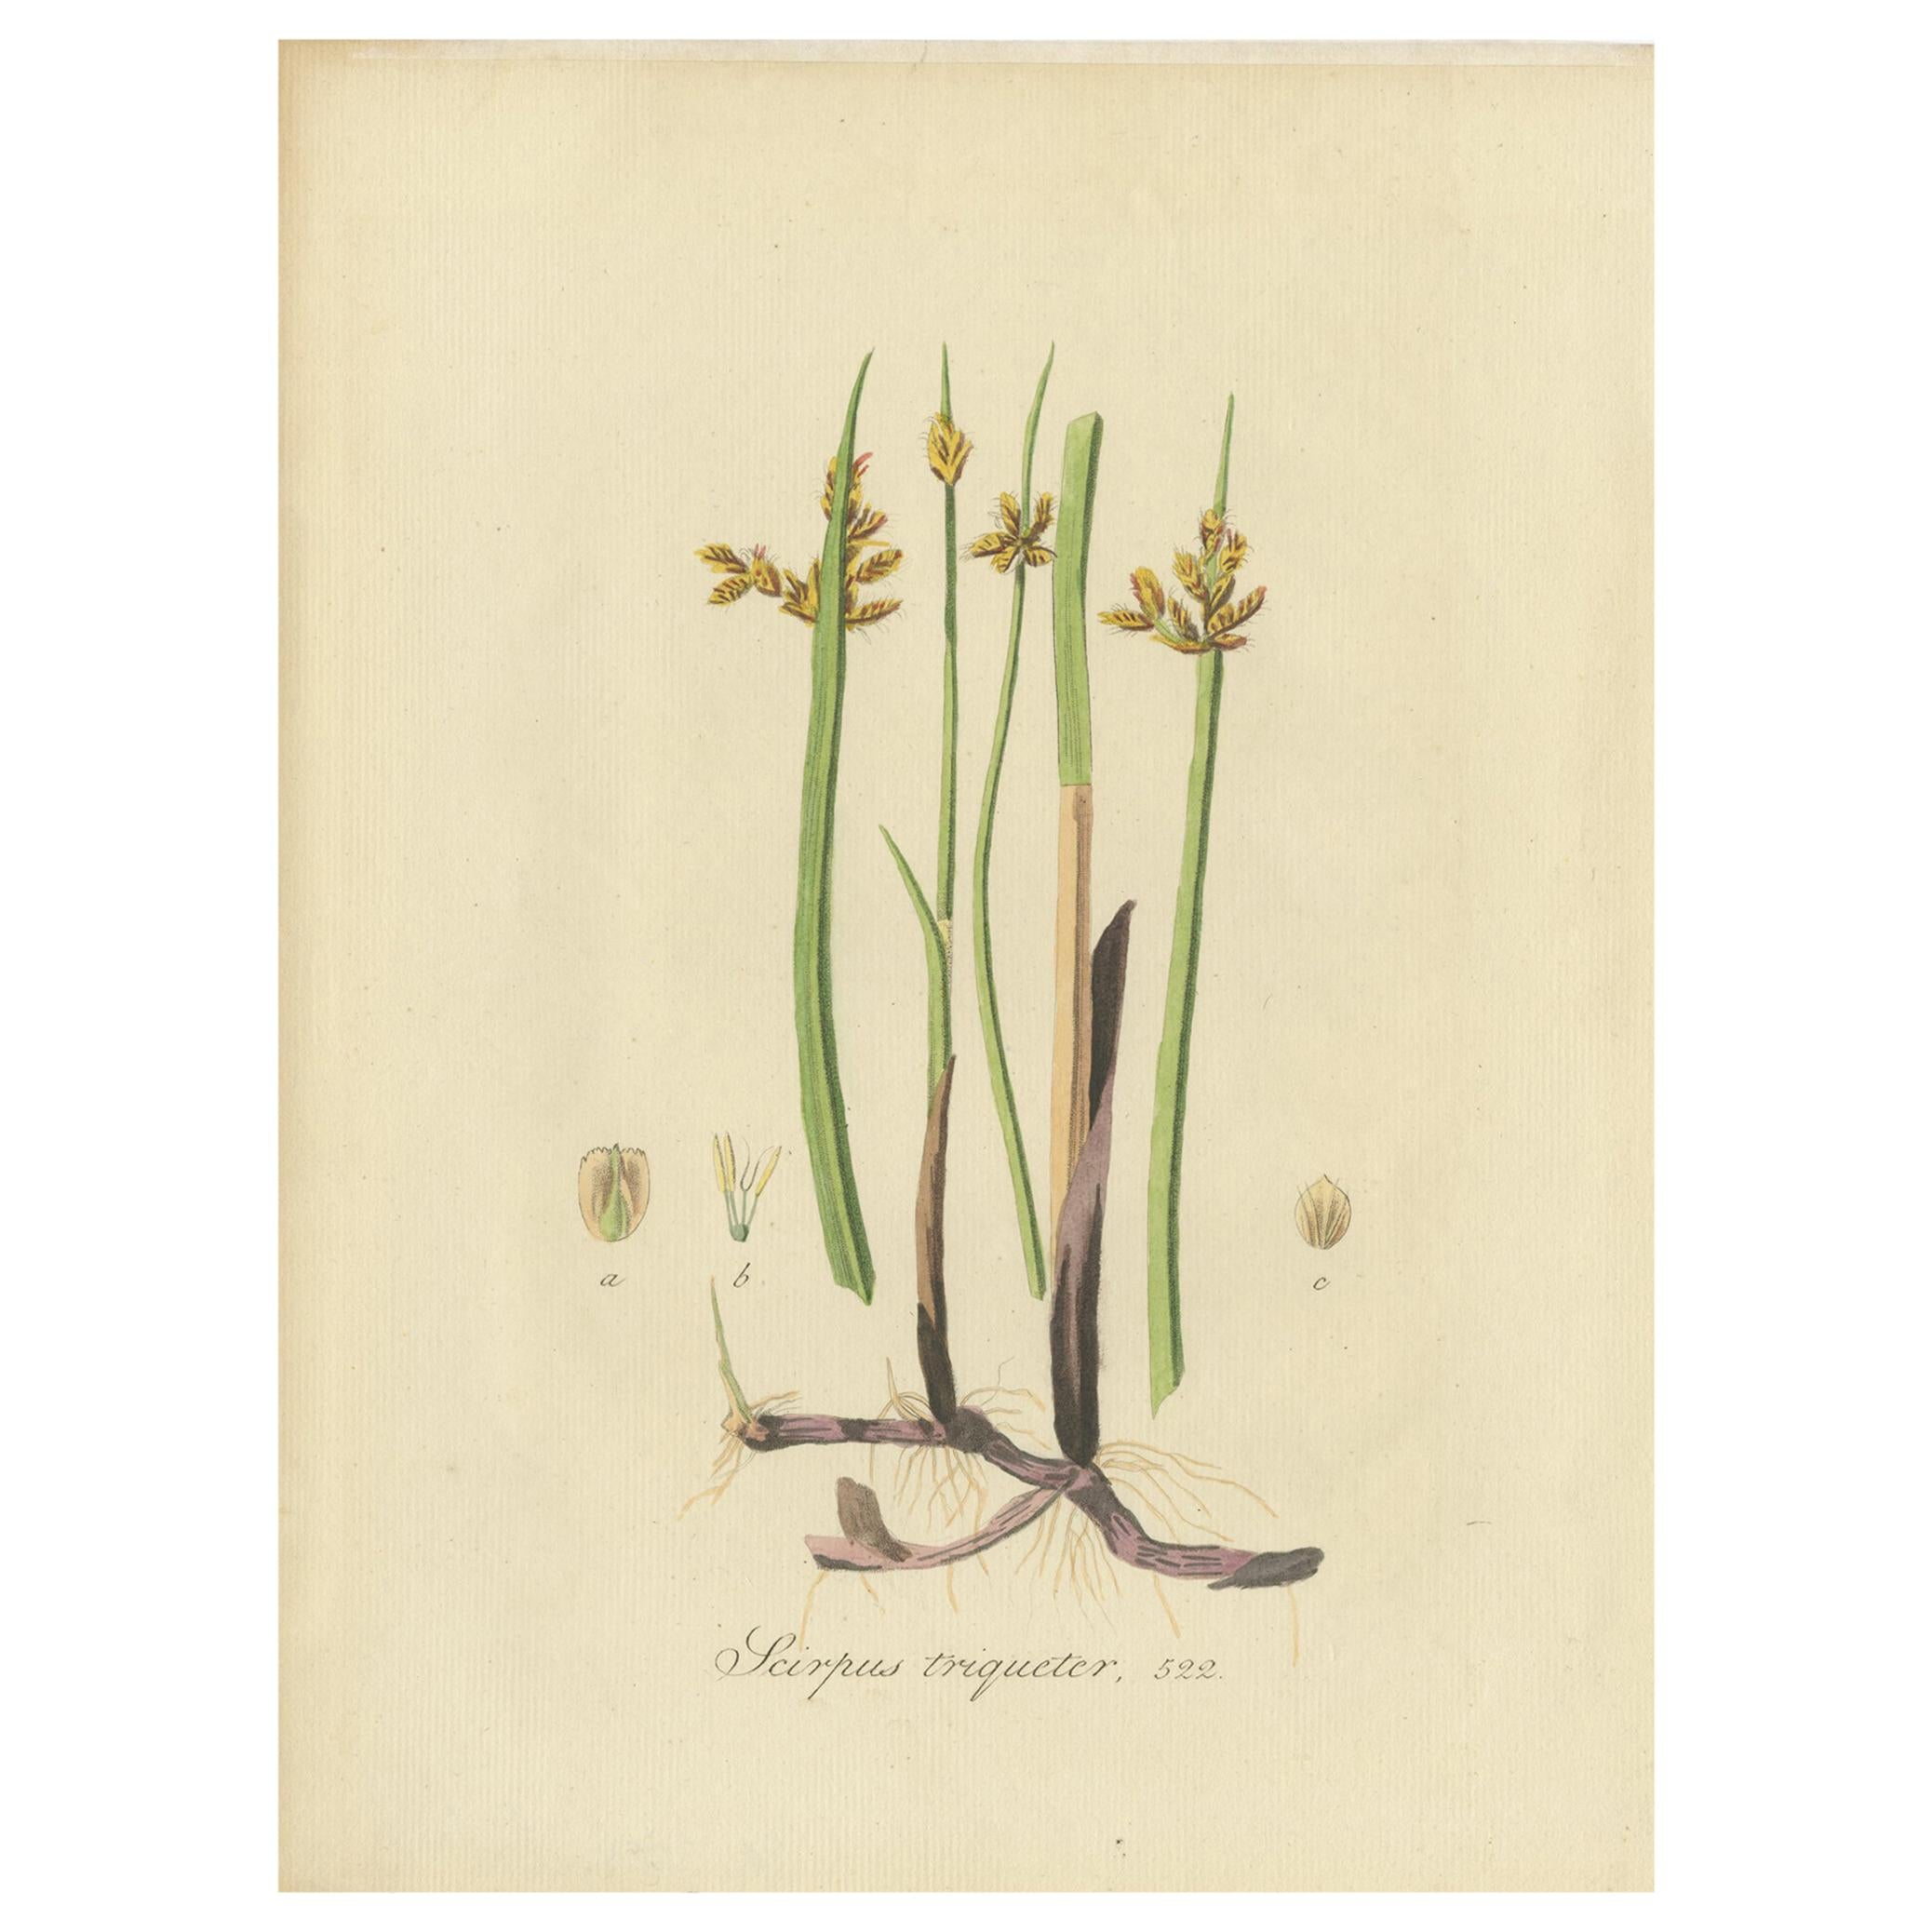 Antique Botany Print of Schoenoplectus Triqueter by Sepp, 1830